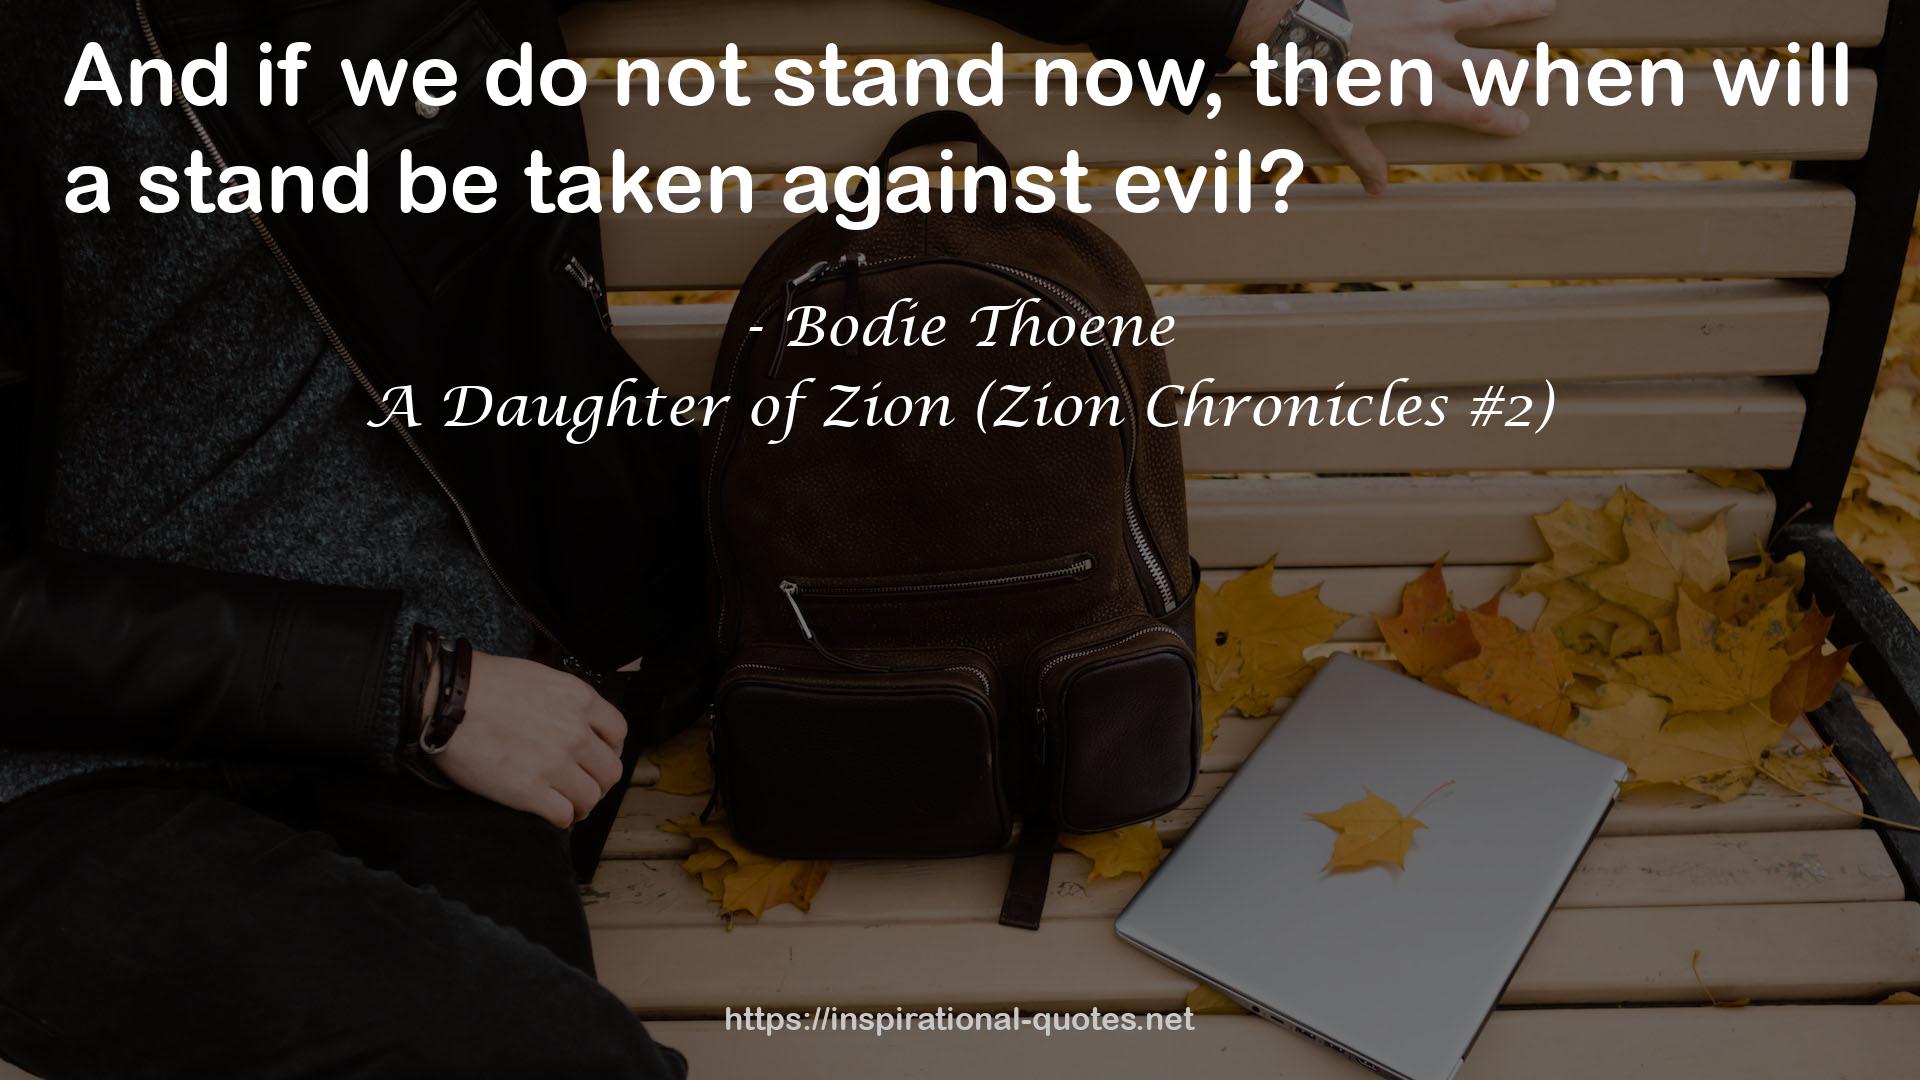 A Daughter of Zion (Zion Chronicles #2) QUOTES